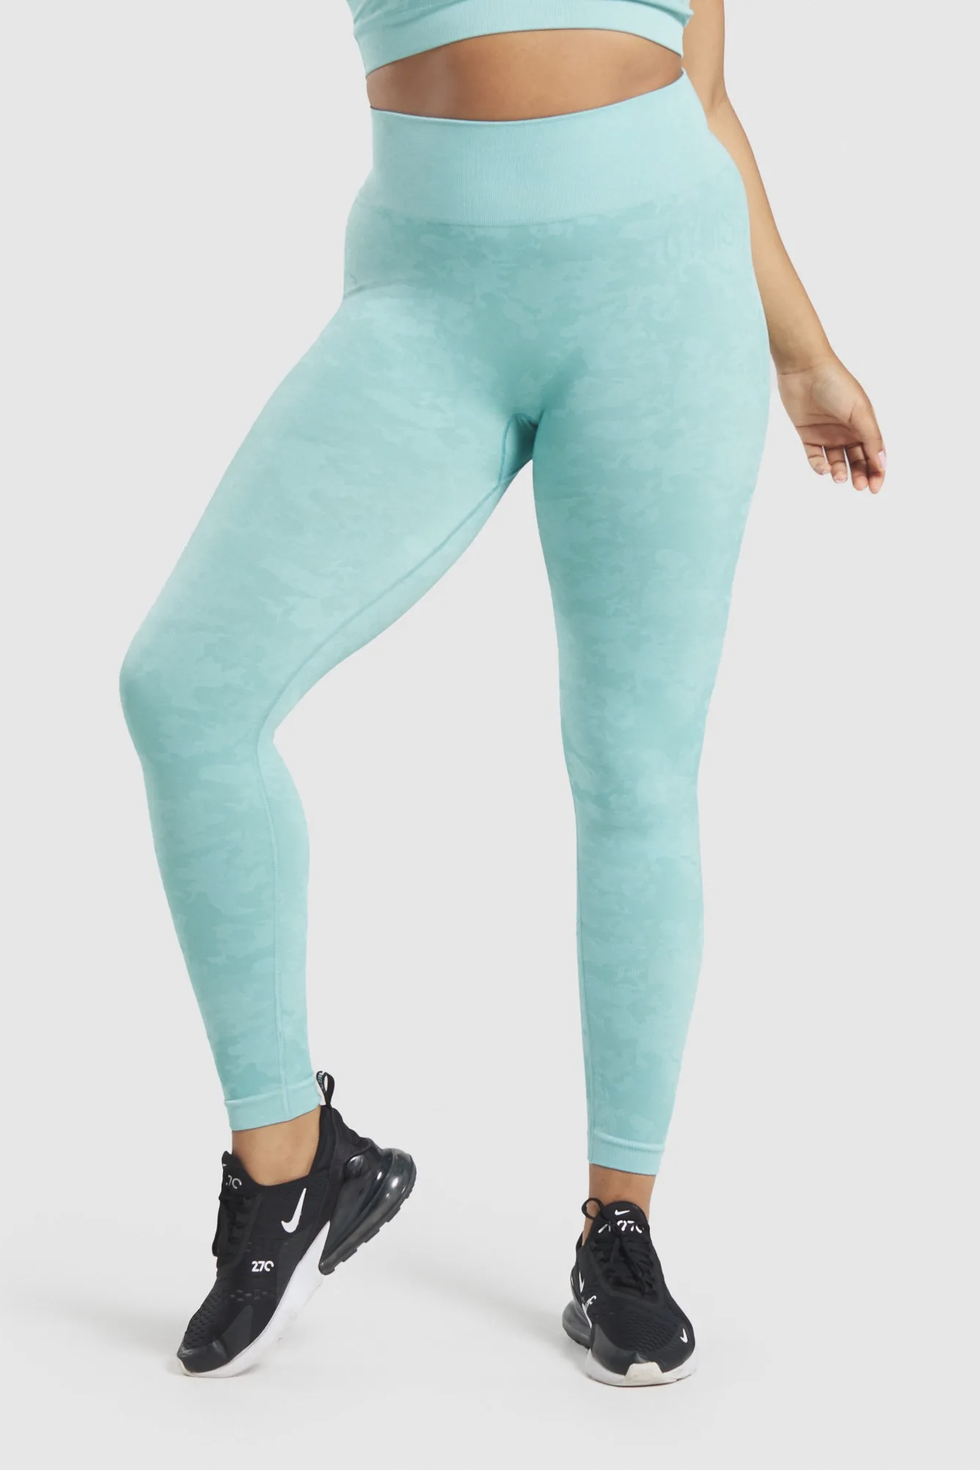 Women's Workout & Gym Clothes - Gymshark